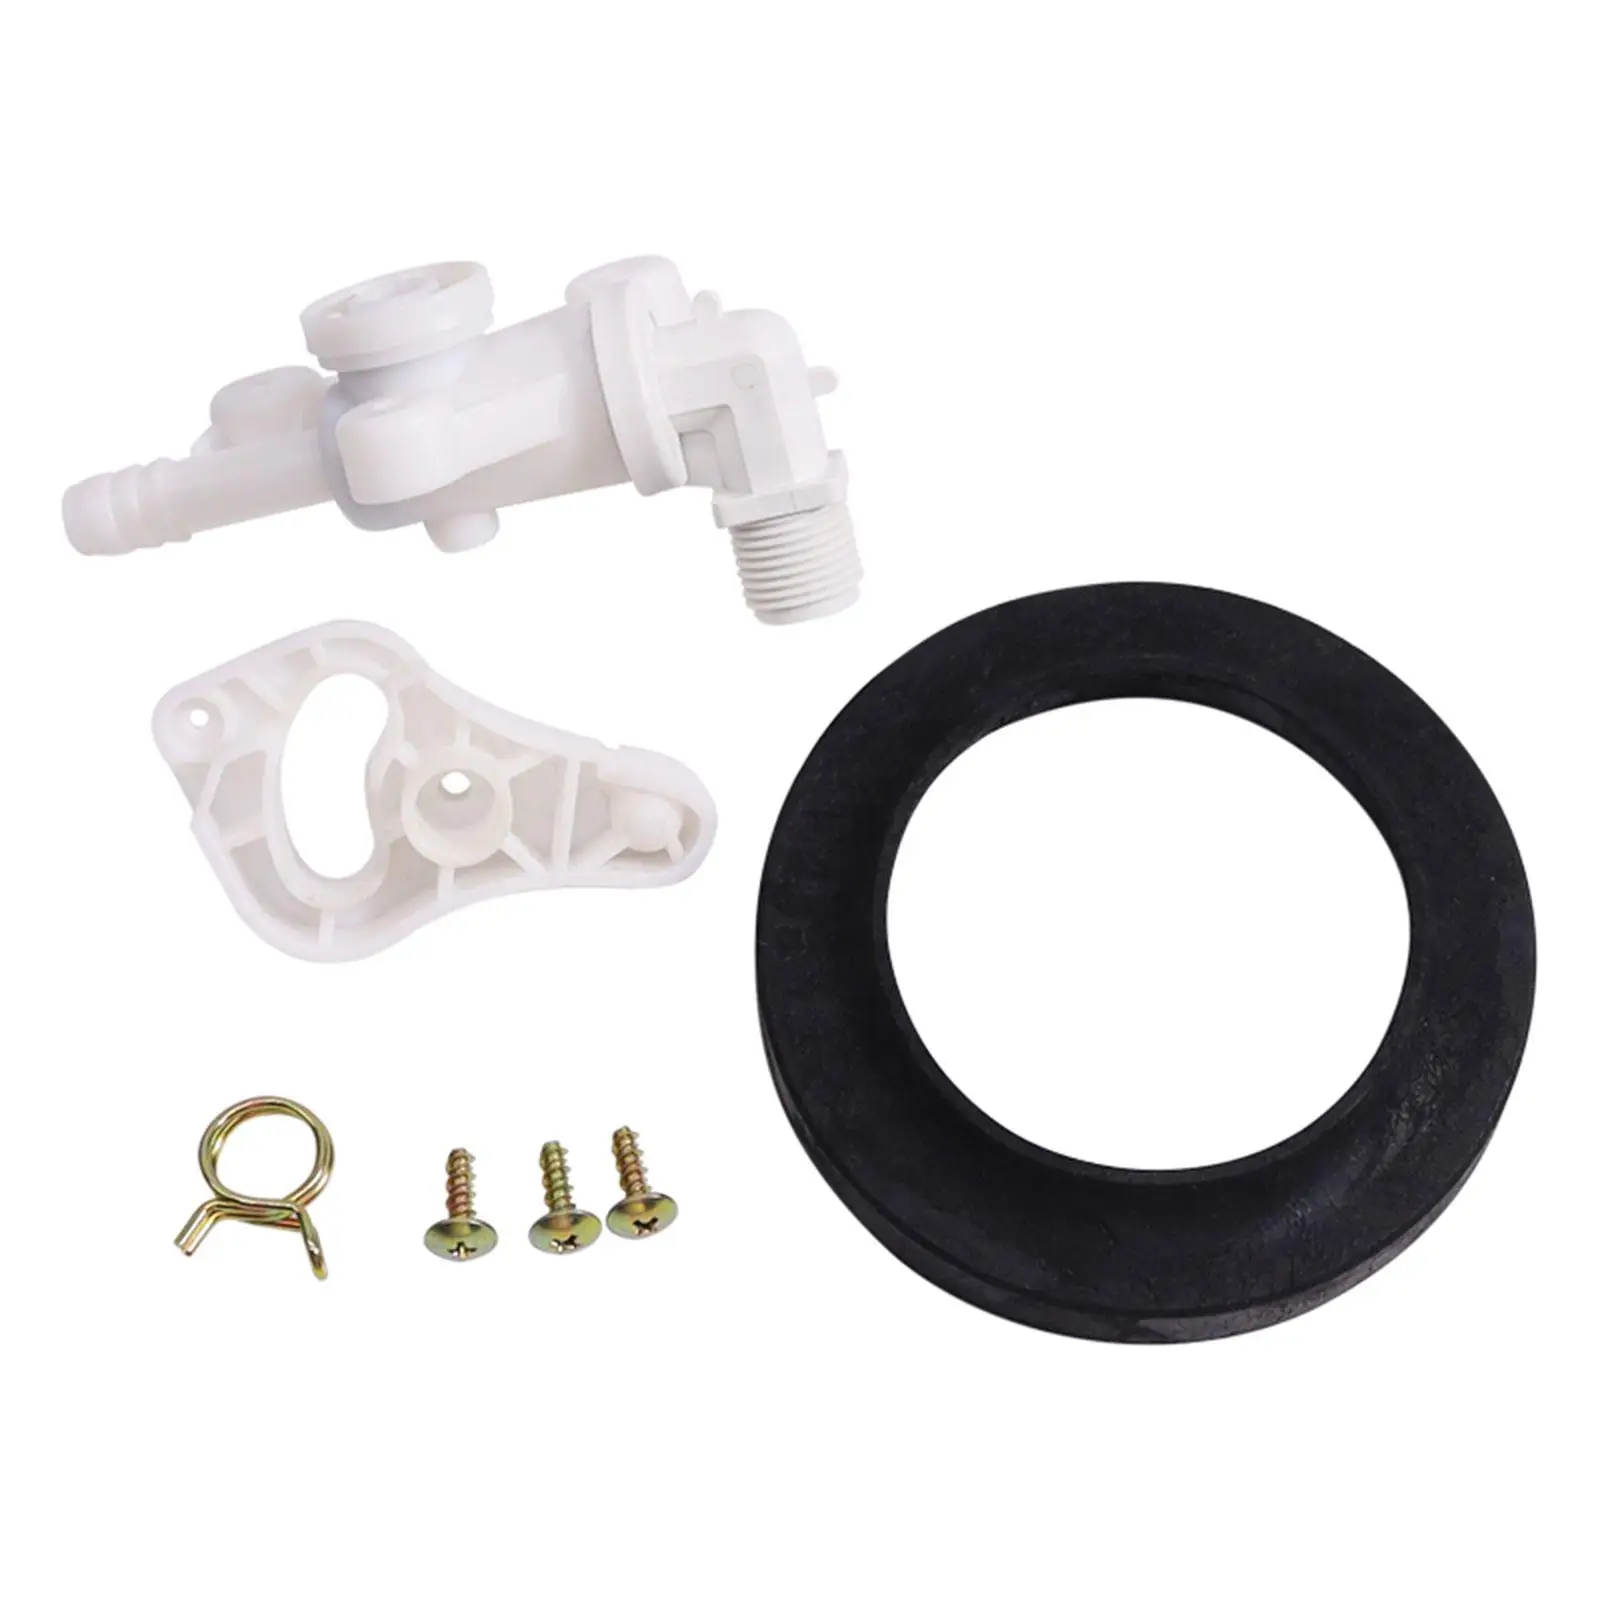 34100 RV Toilet Water Valve for Style Lite Toilets Replacements RV Toilet Valve with RV ball Seal for Durable